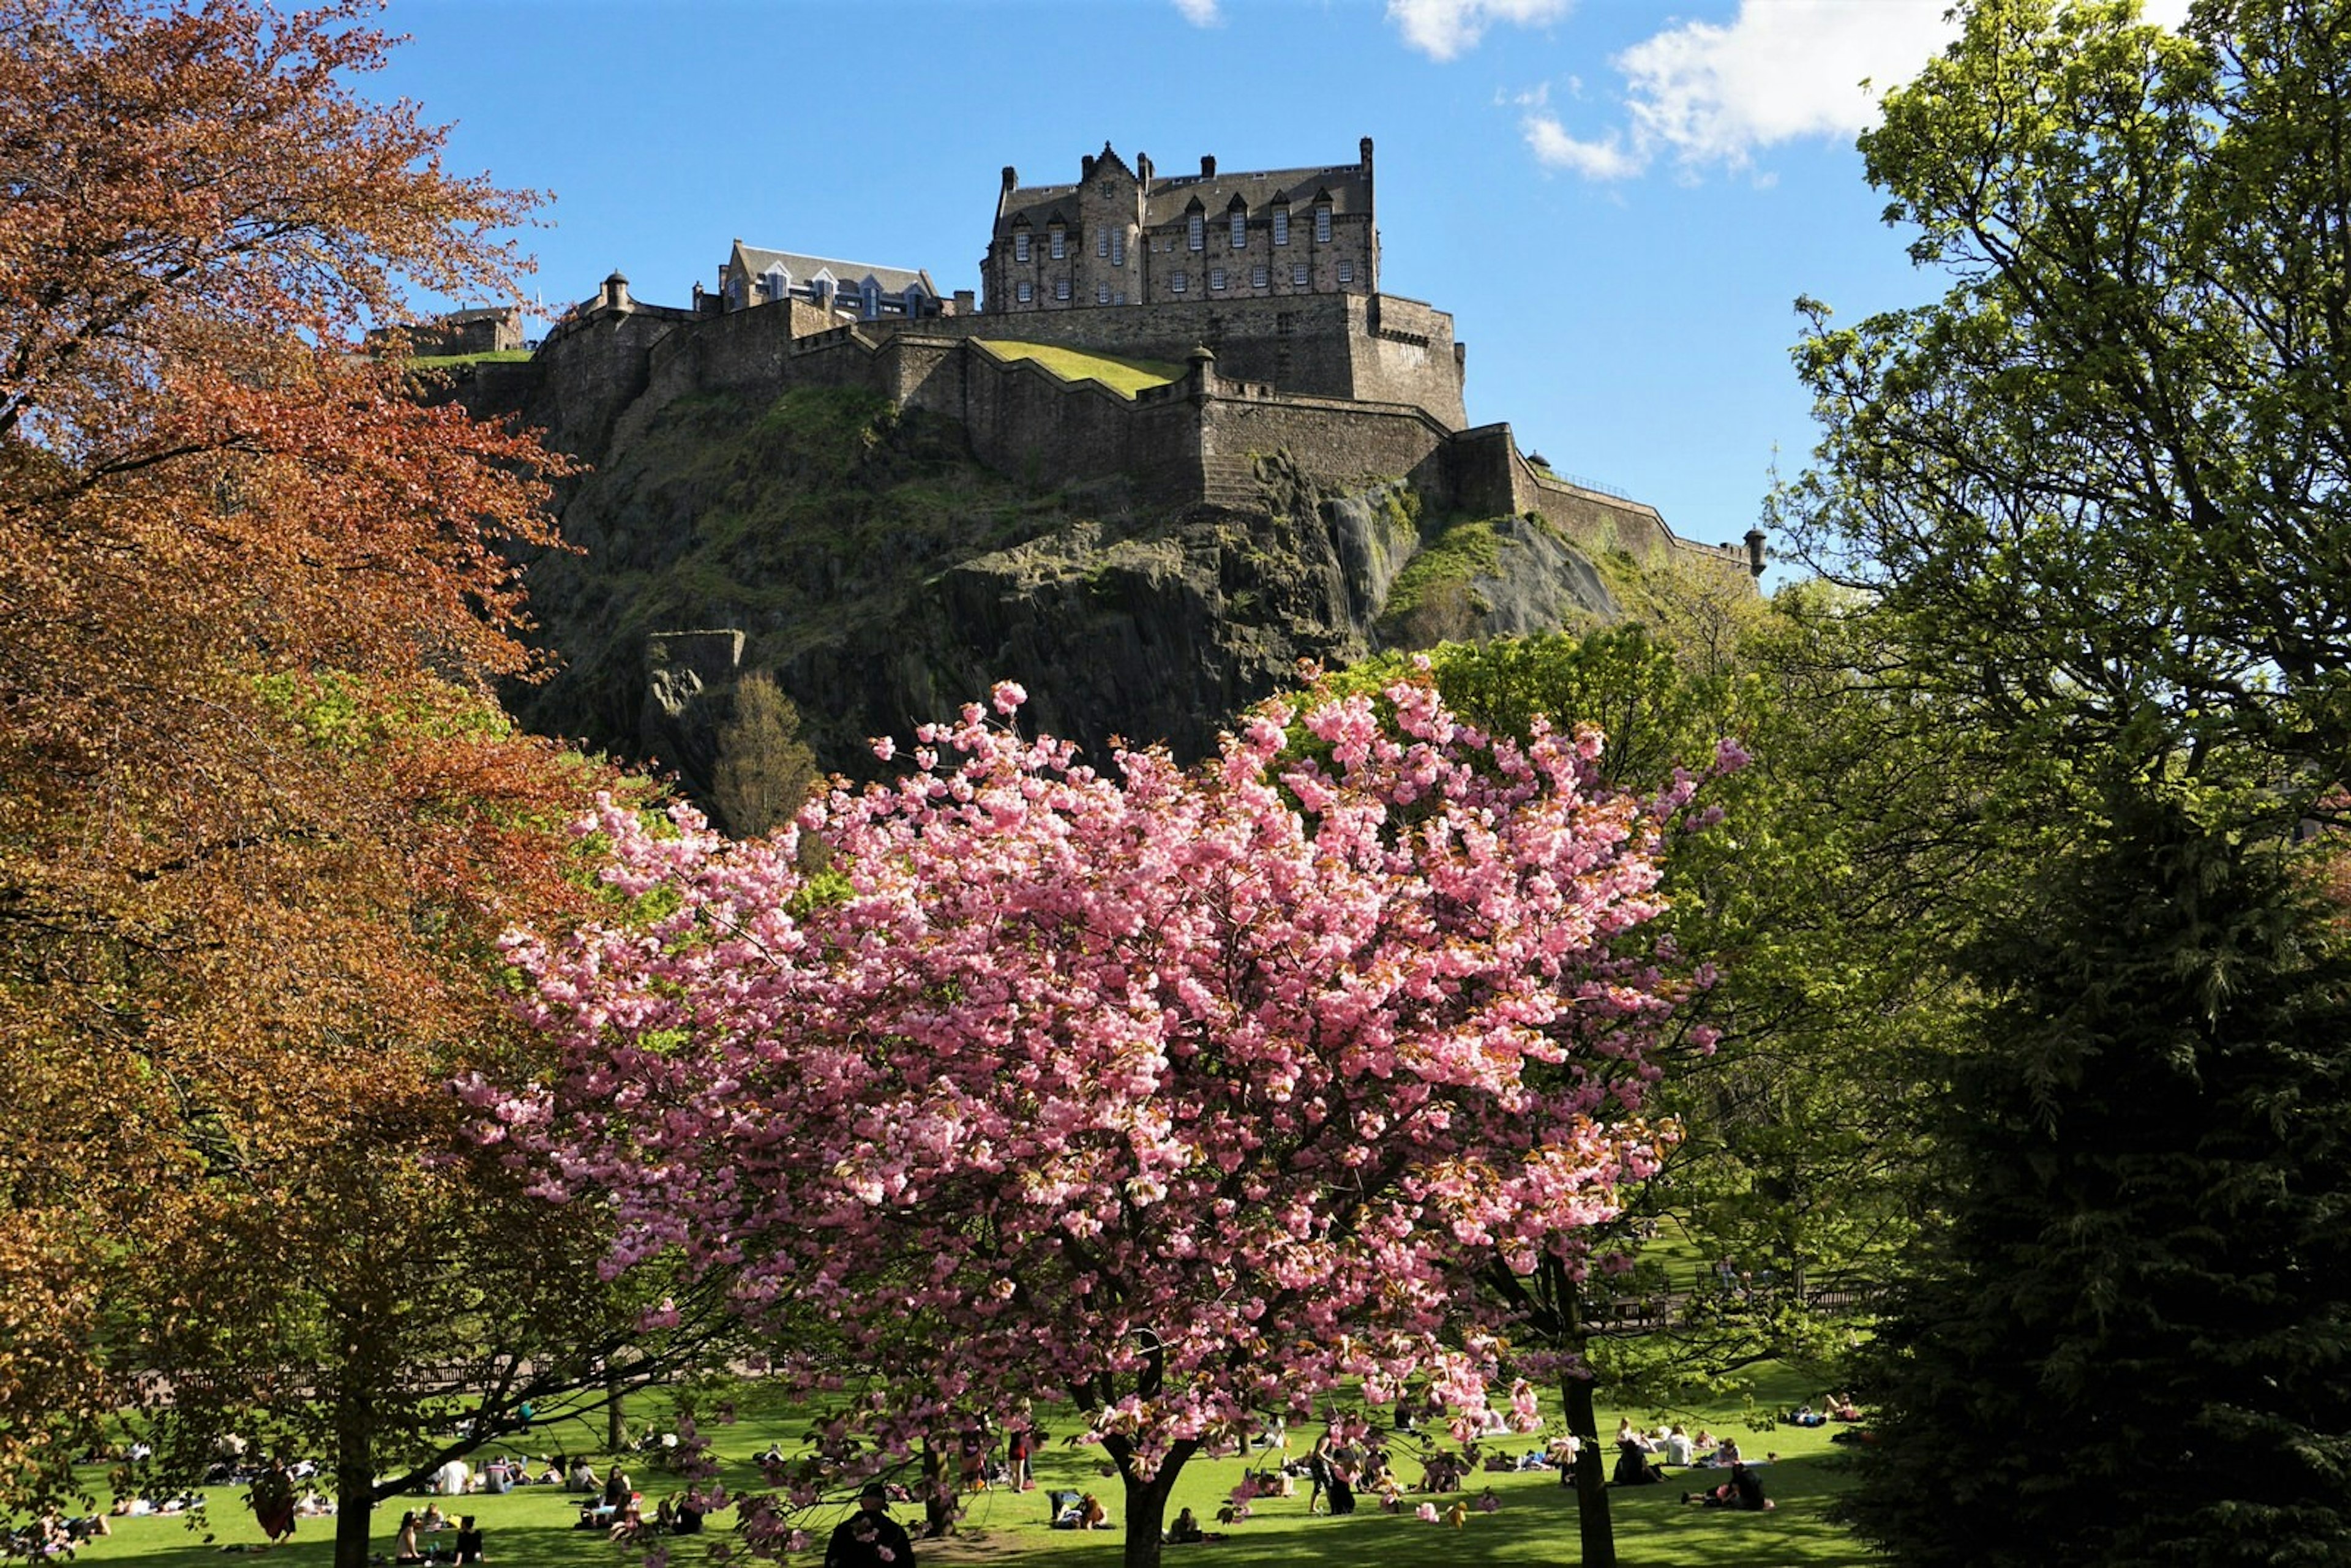 Edinburgh Castle with some spring cherry blossom in the park beneath it